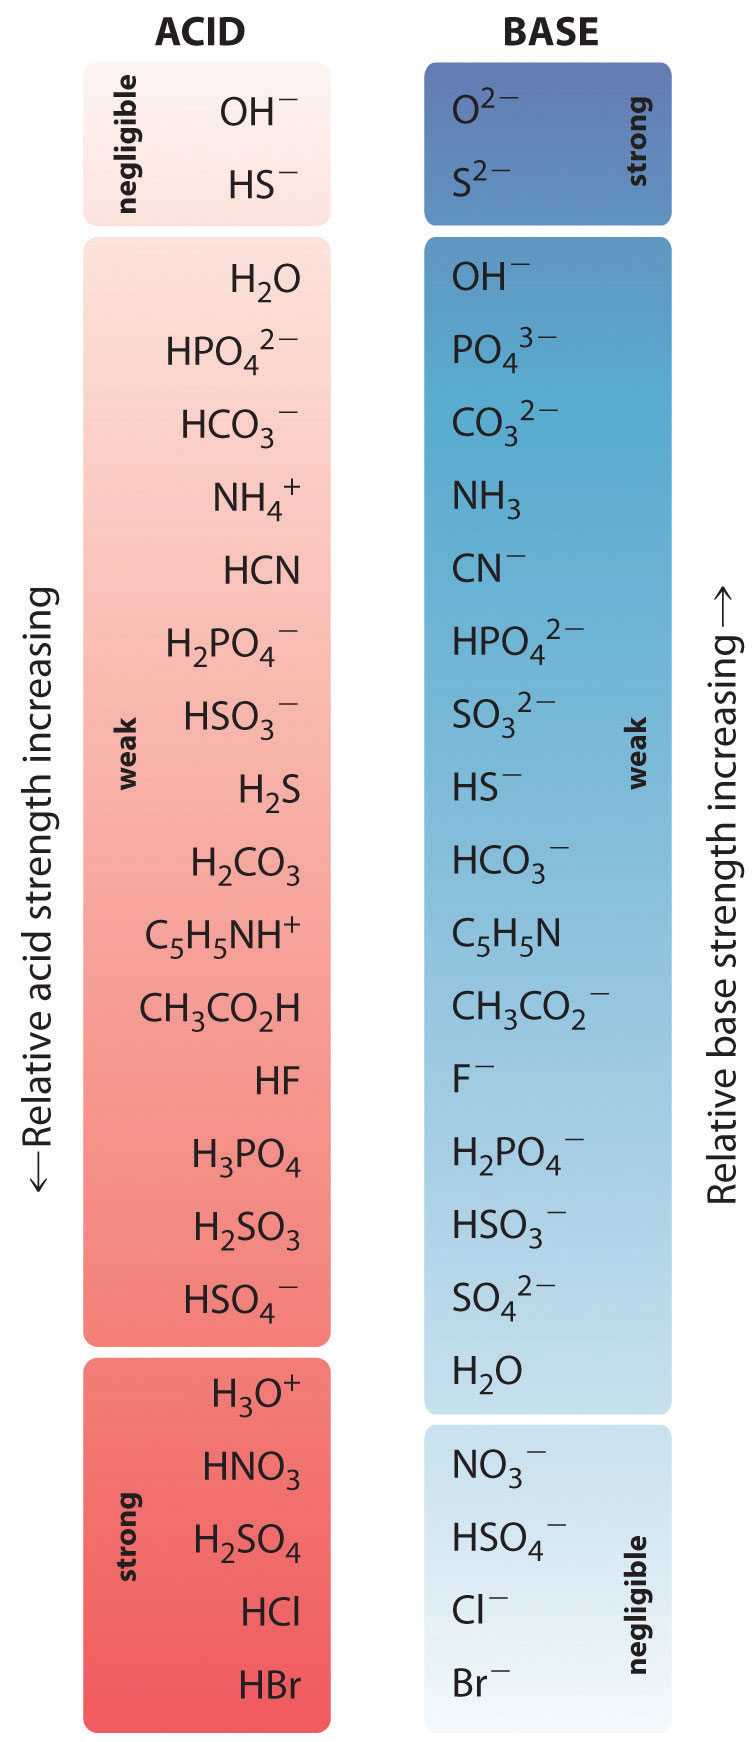 negligible acids are hydroxide ion and HS minius. Strong acids are h3O plus, HNO3, H2SO4, hydrochloric acid, and hydrobromic acid . Strong bases are O minus 2, and S minus 2. Negligible ions are NO3 minus, HSO4 minus, Cl minus, and Br minus. 